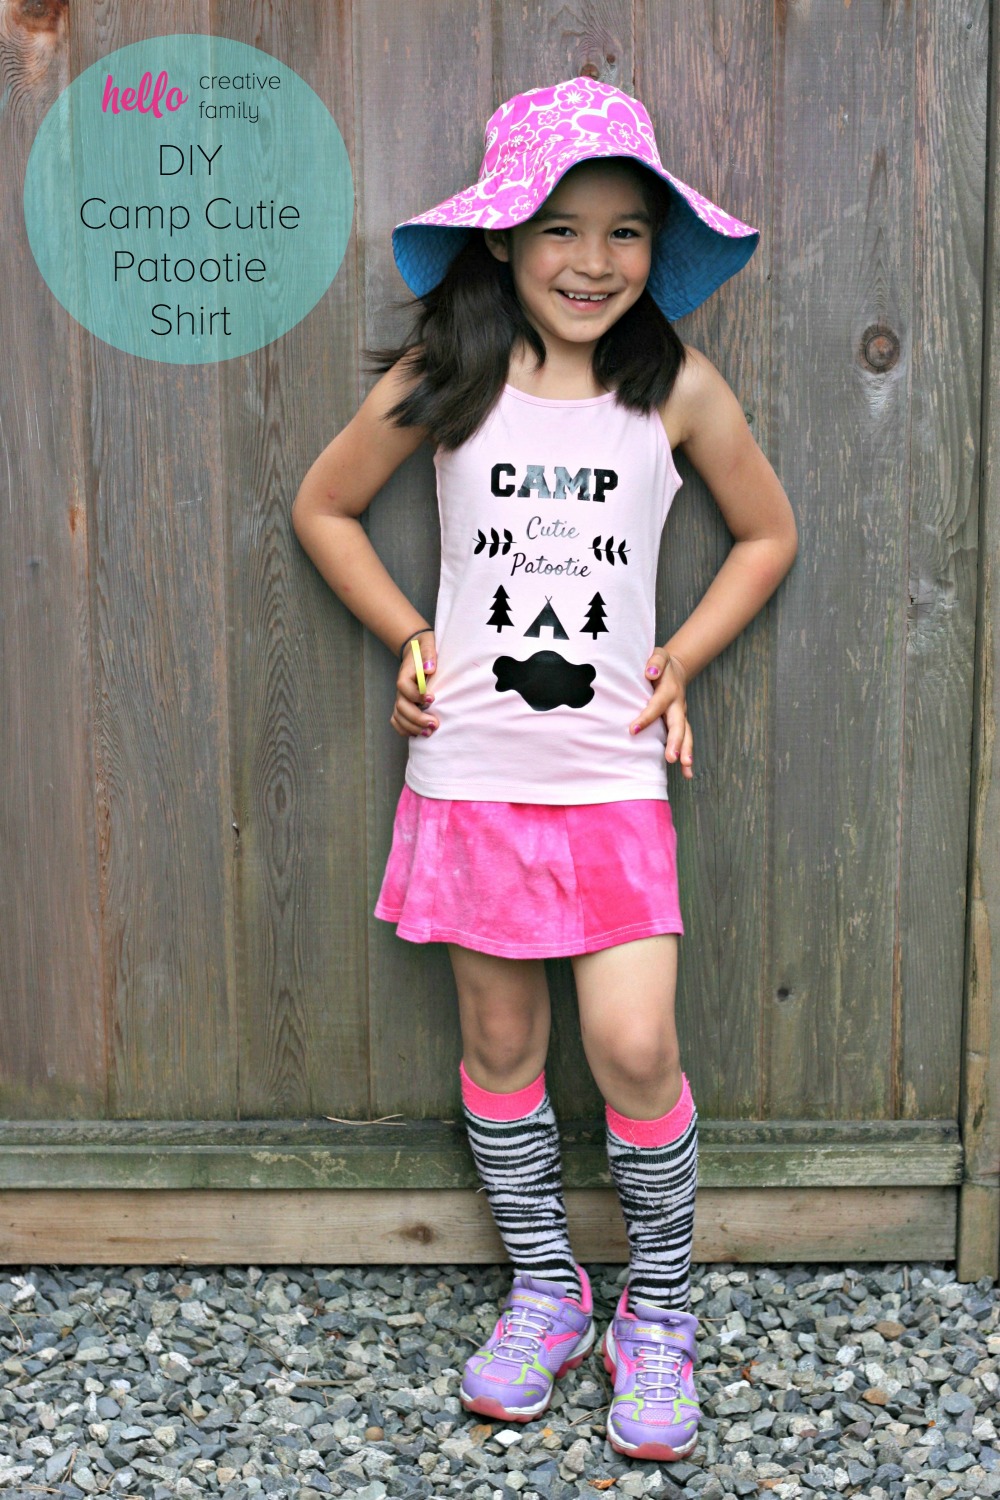 Send your little camper off to summer camp in style with a DIY Camp Cutie Patootie tank top or tshirt. Cut file included so you can make this project on the Cricut Explore.Send your little camper off to summer camp in style with a DIY Camp Cutie Patootie tank top or tshirt. Cut file included so you can make this project on the Cricut Explore.